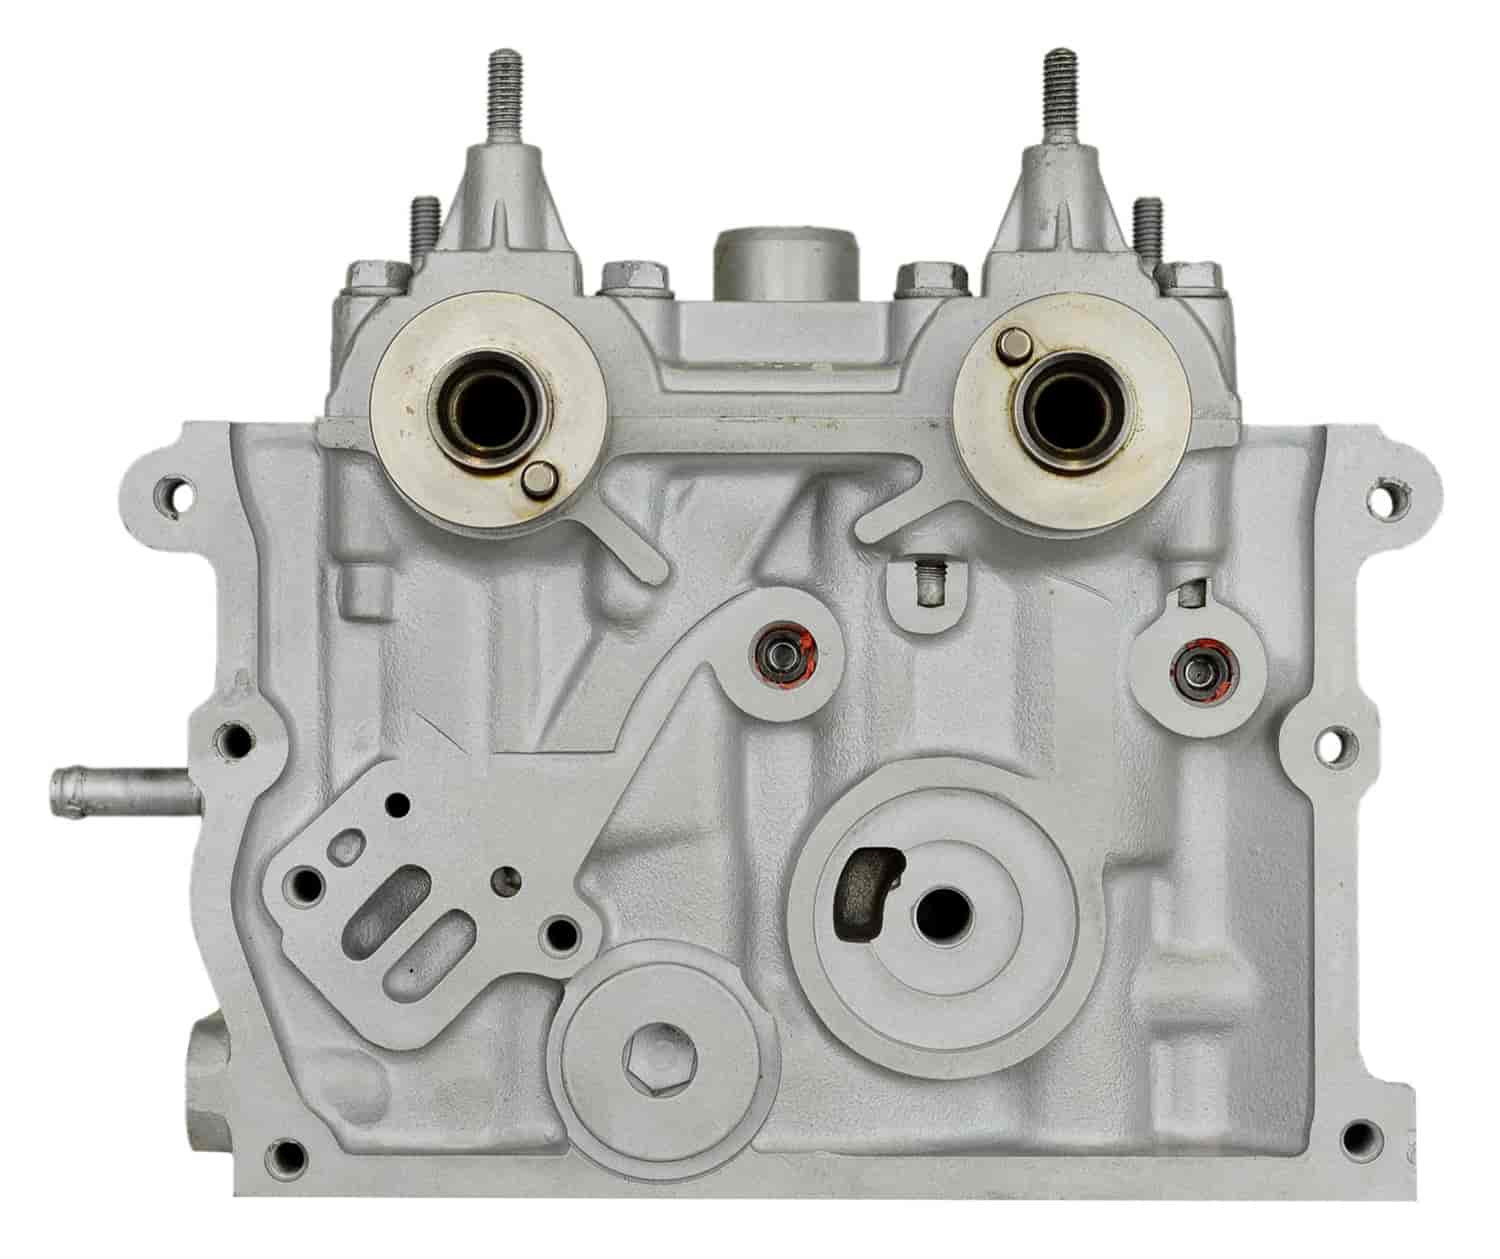 Remanufactured Crate Engine for 1999-2003 Chevy/Suzuki with 2.0L